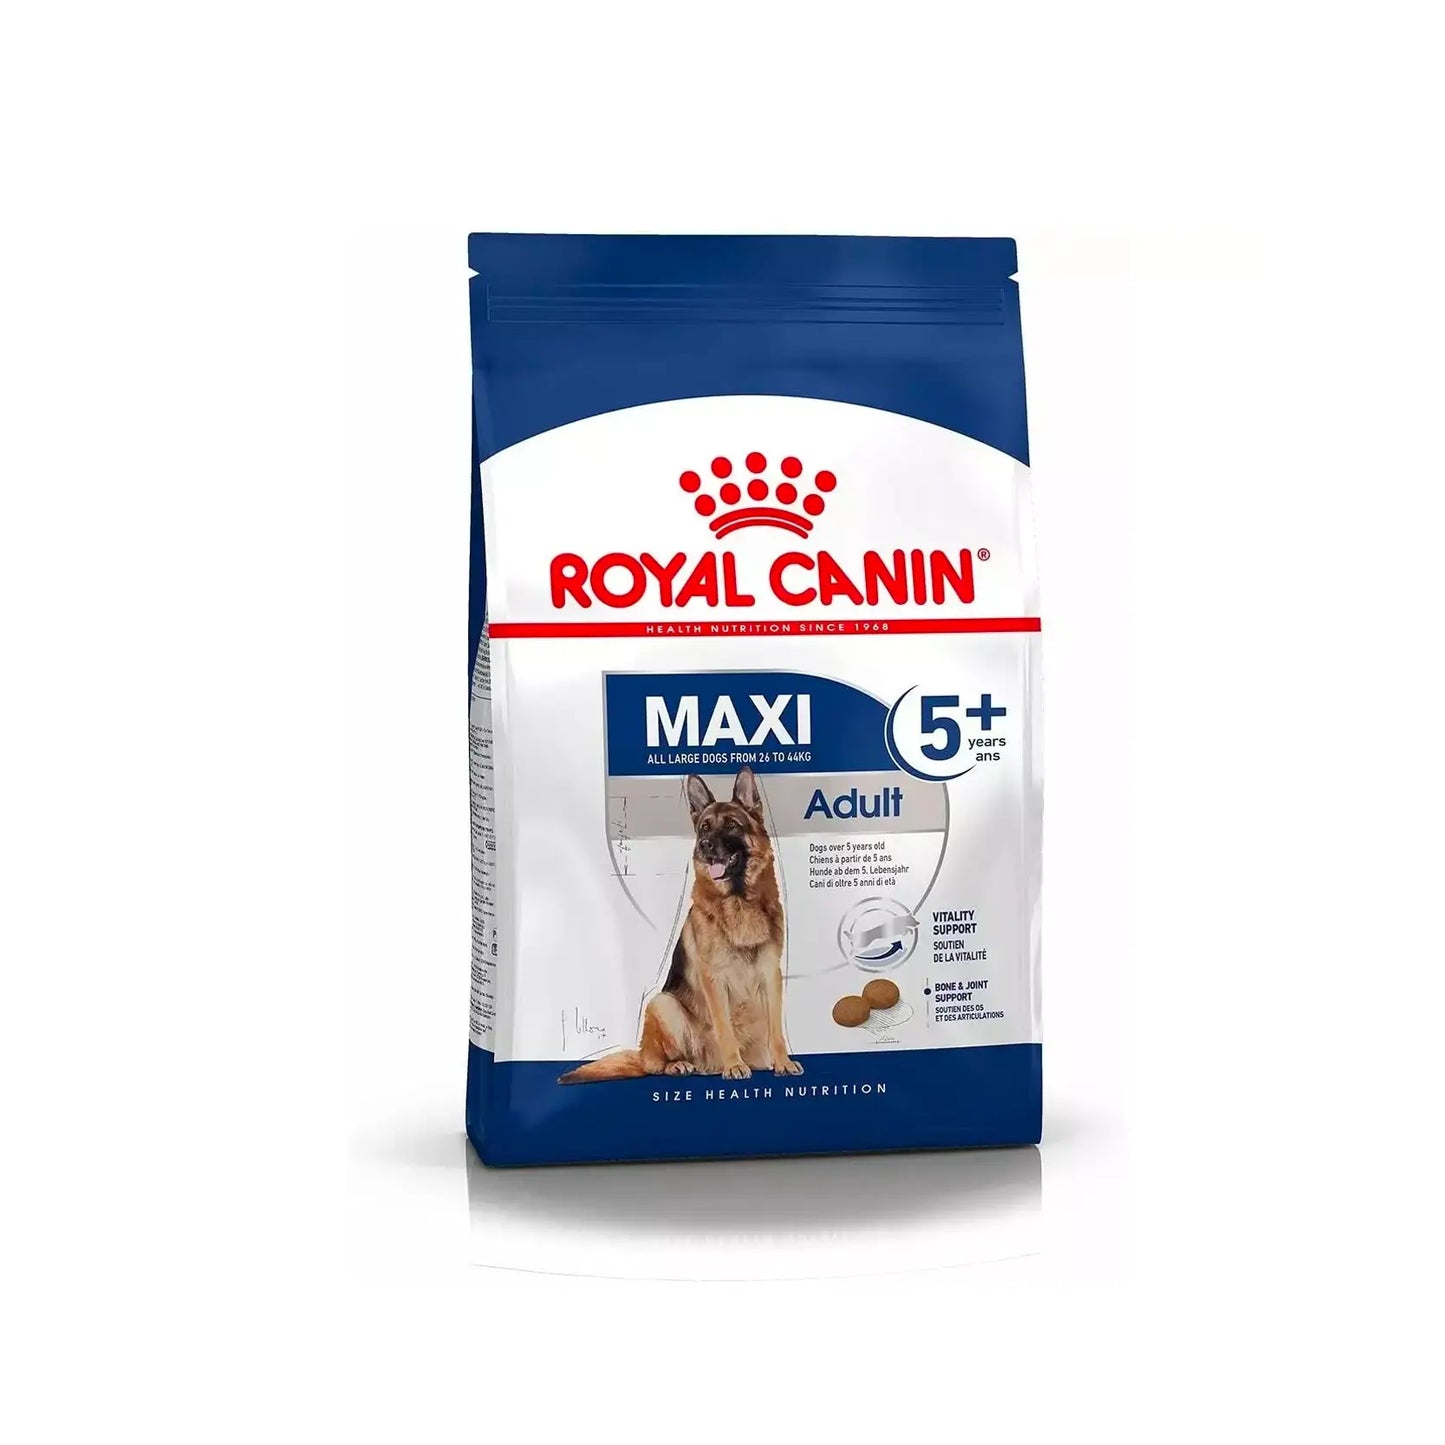 Royal Canin - MAXI Adult 5+ Dogs Dry Food 15kg